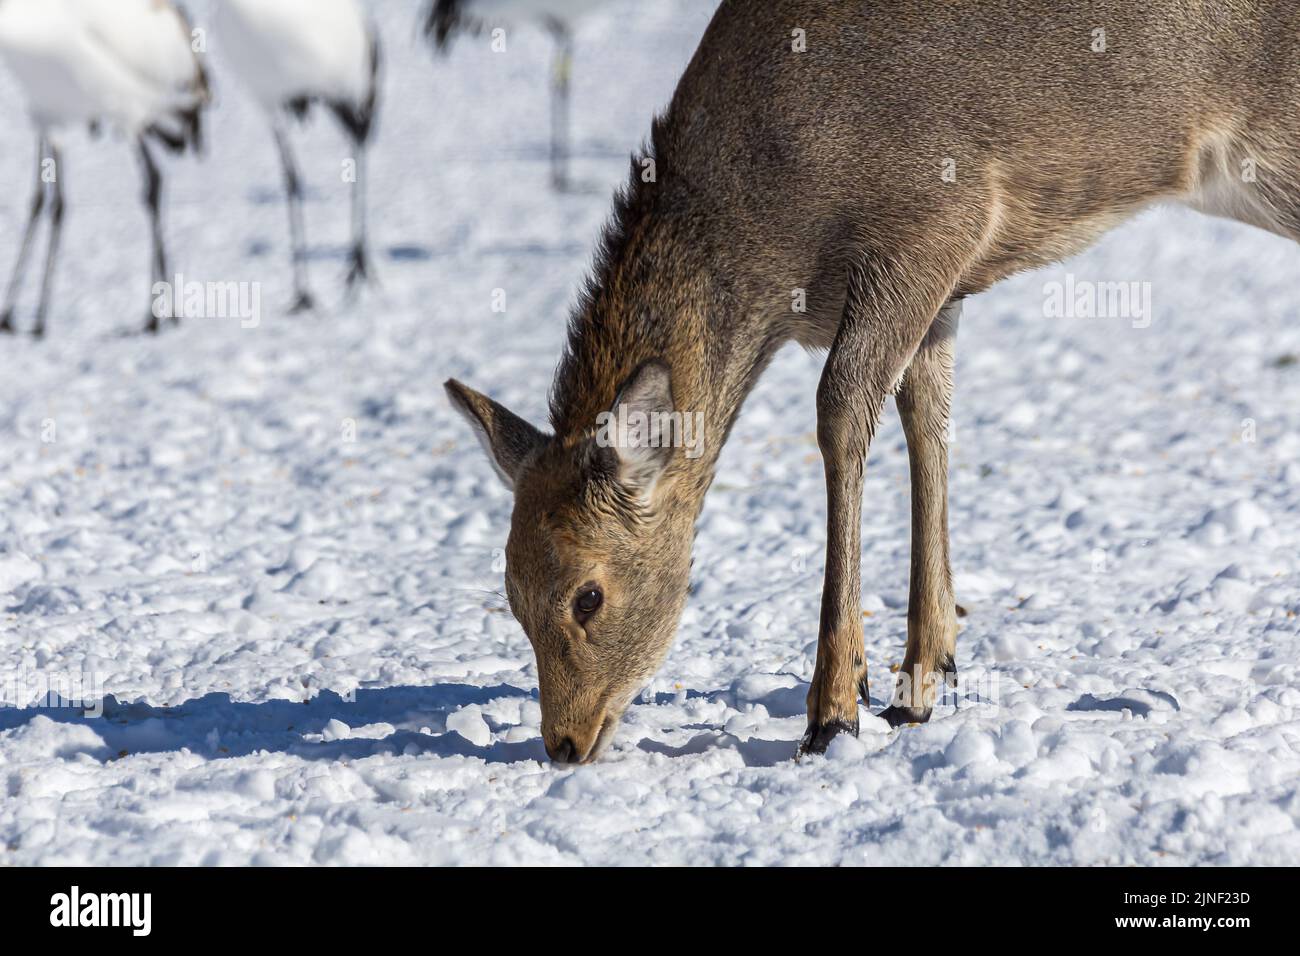 A closeup of a cute little Yezo sika deer picking at the snowy ground in an icy wilderness with white birds around it Stock Photo